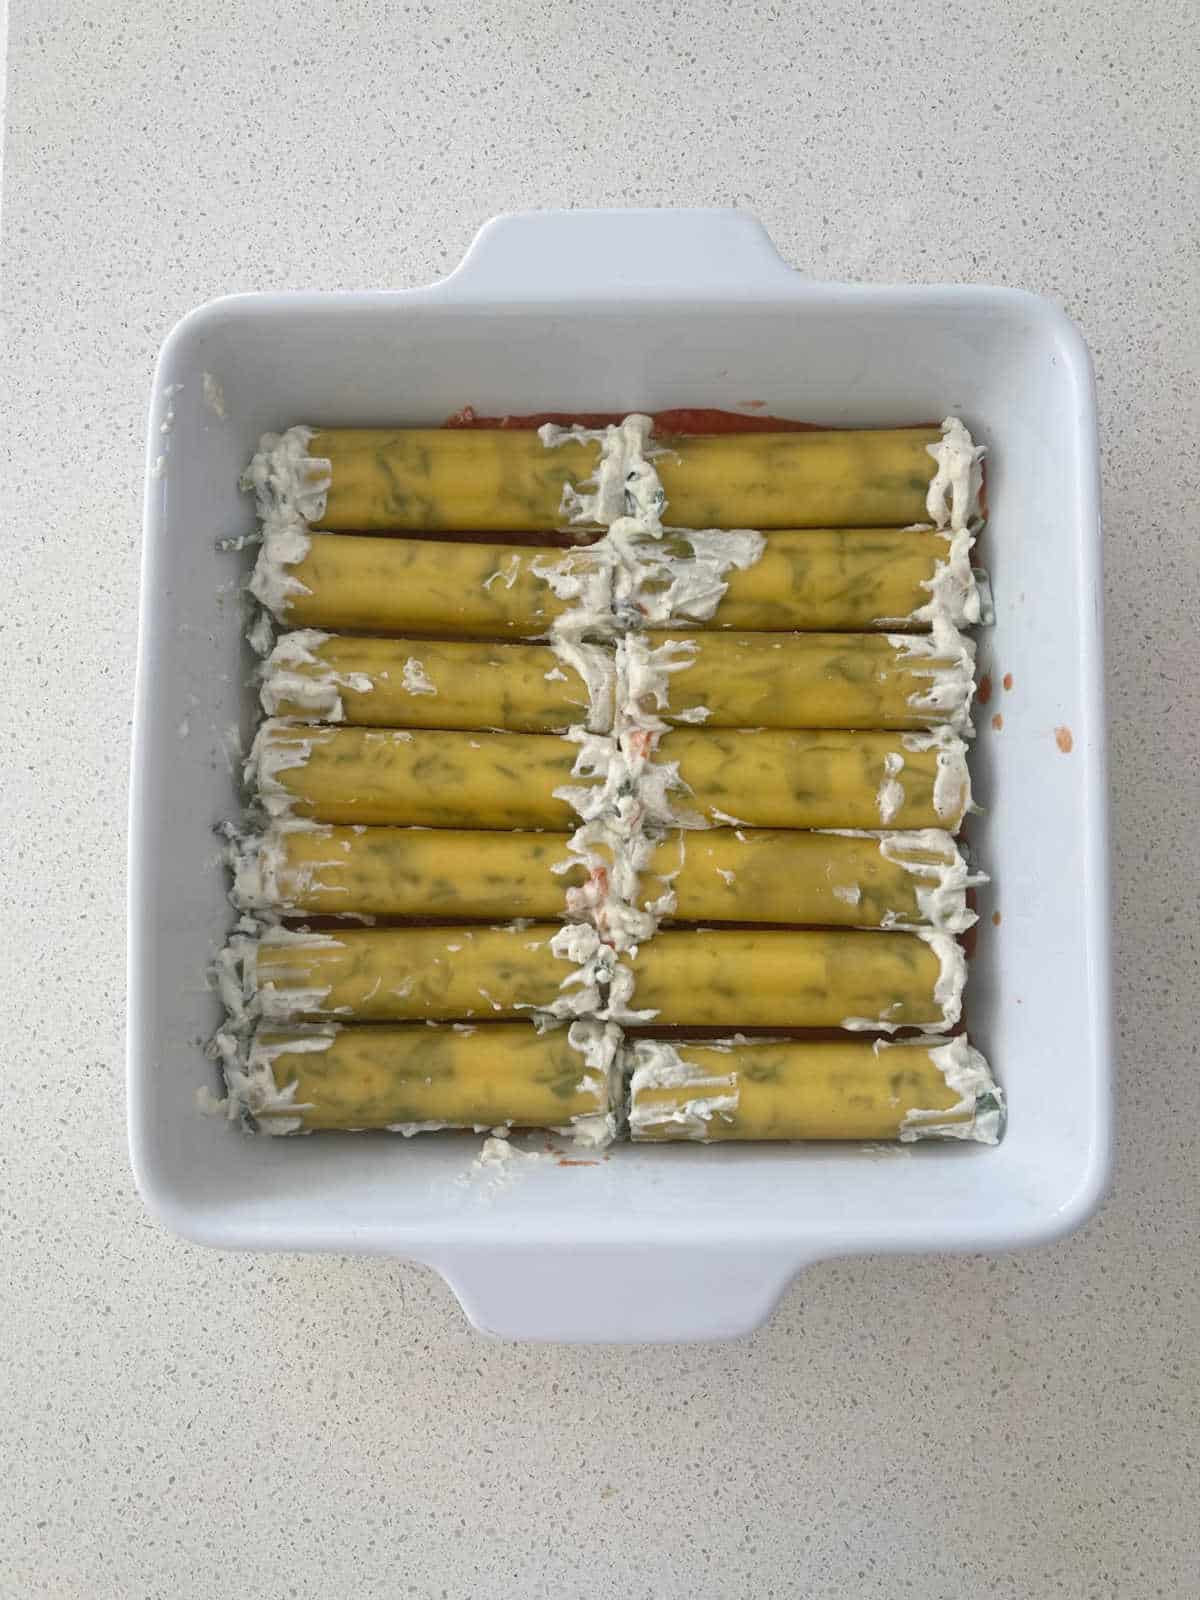 Uncooked spinach and ricotta cannelloni in a white baking dish.